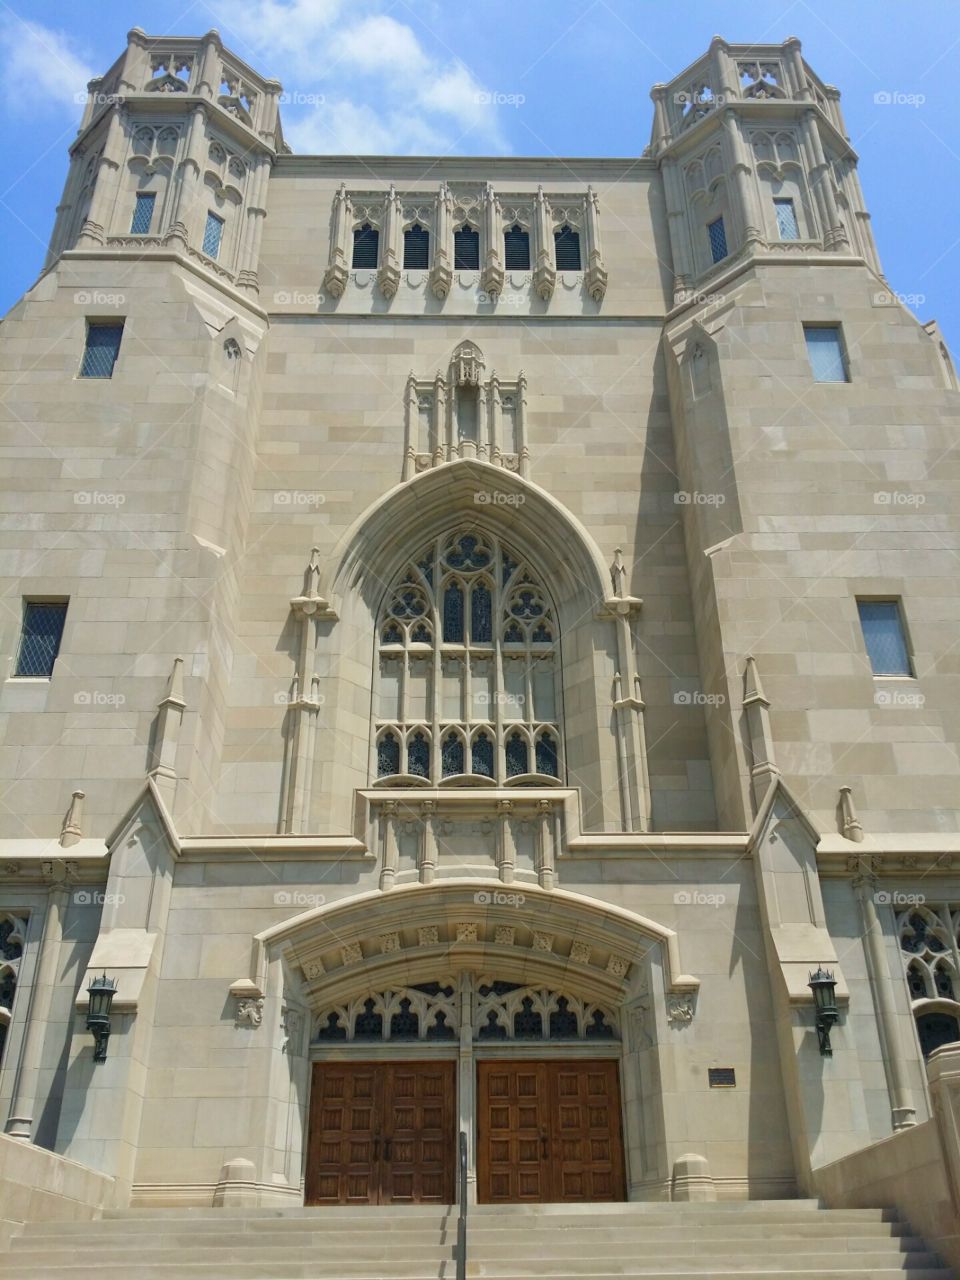 Scottish rite cathedral south dide. indy